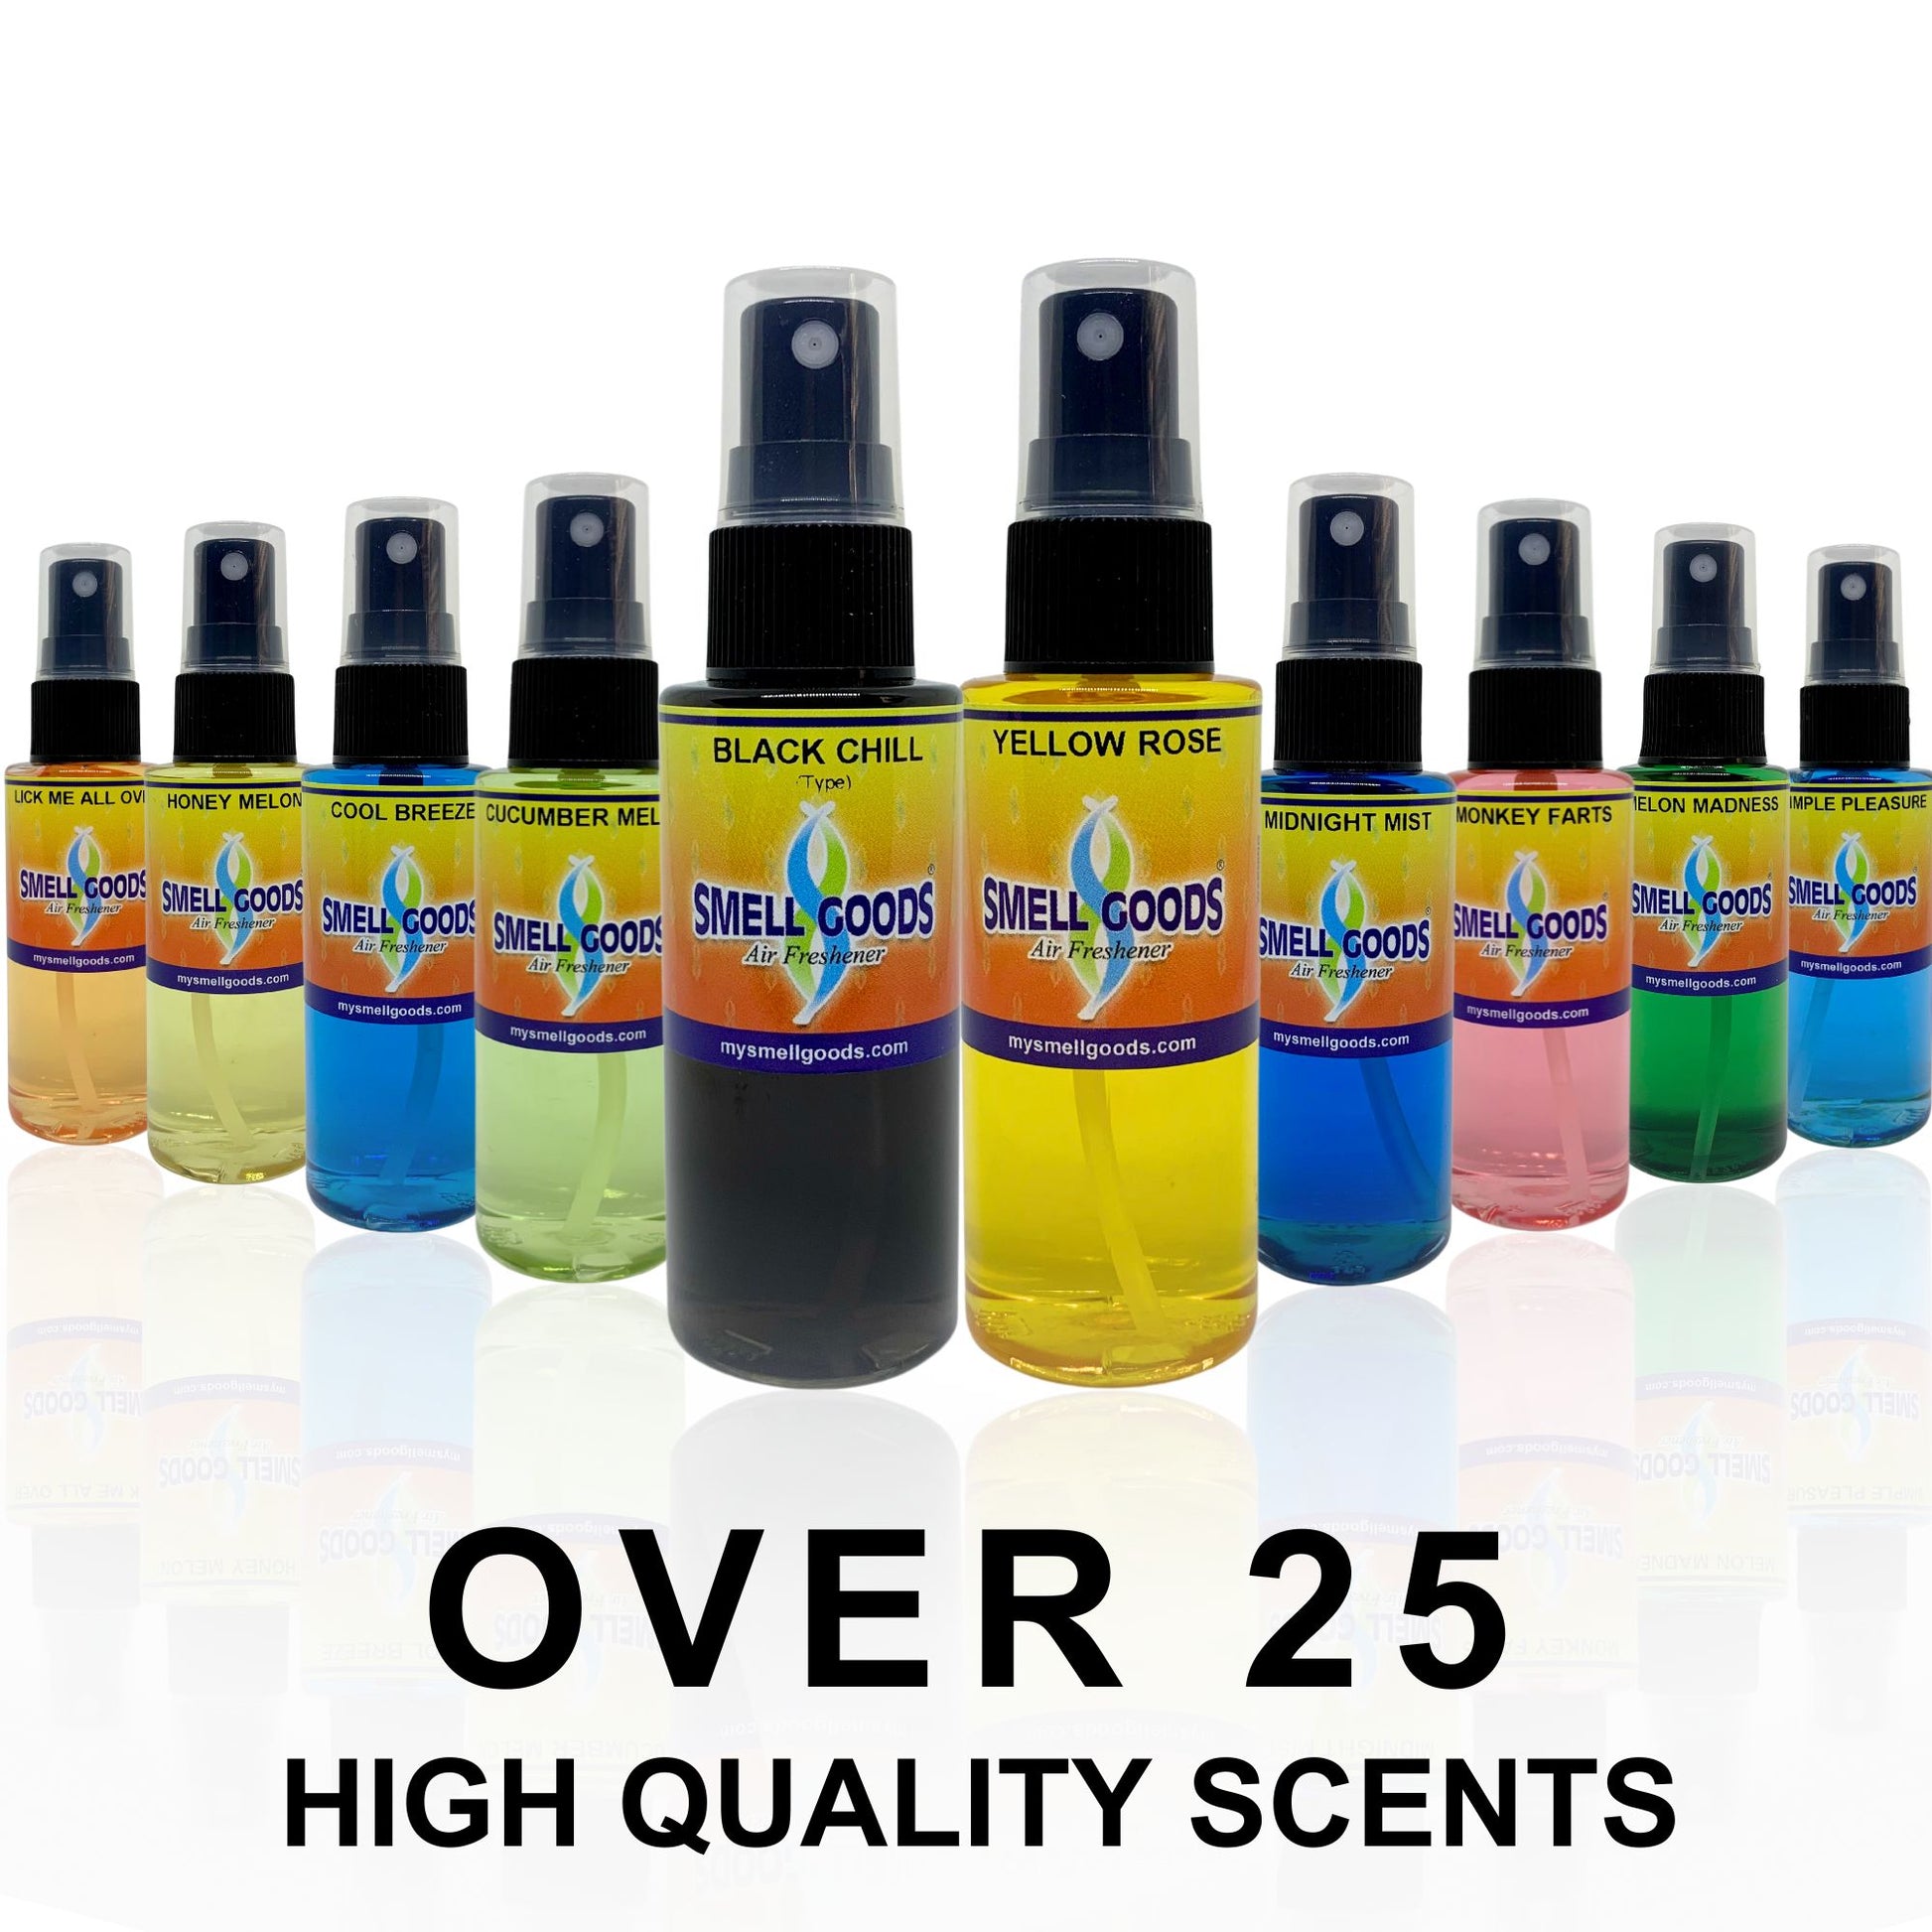 Smell Goods offers over 25 high quality scents for you to choose from.